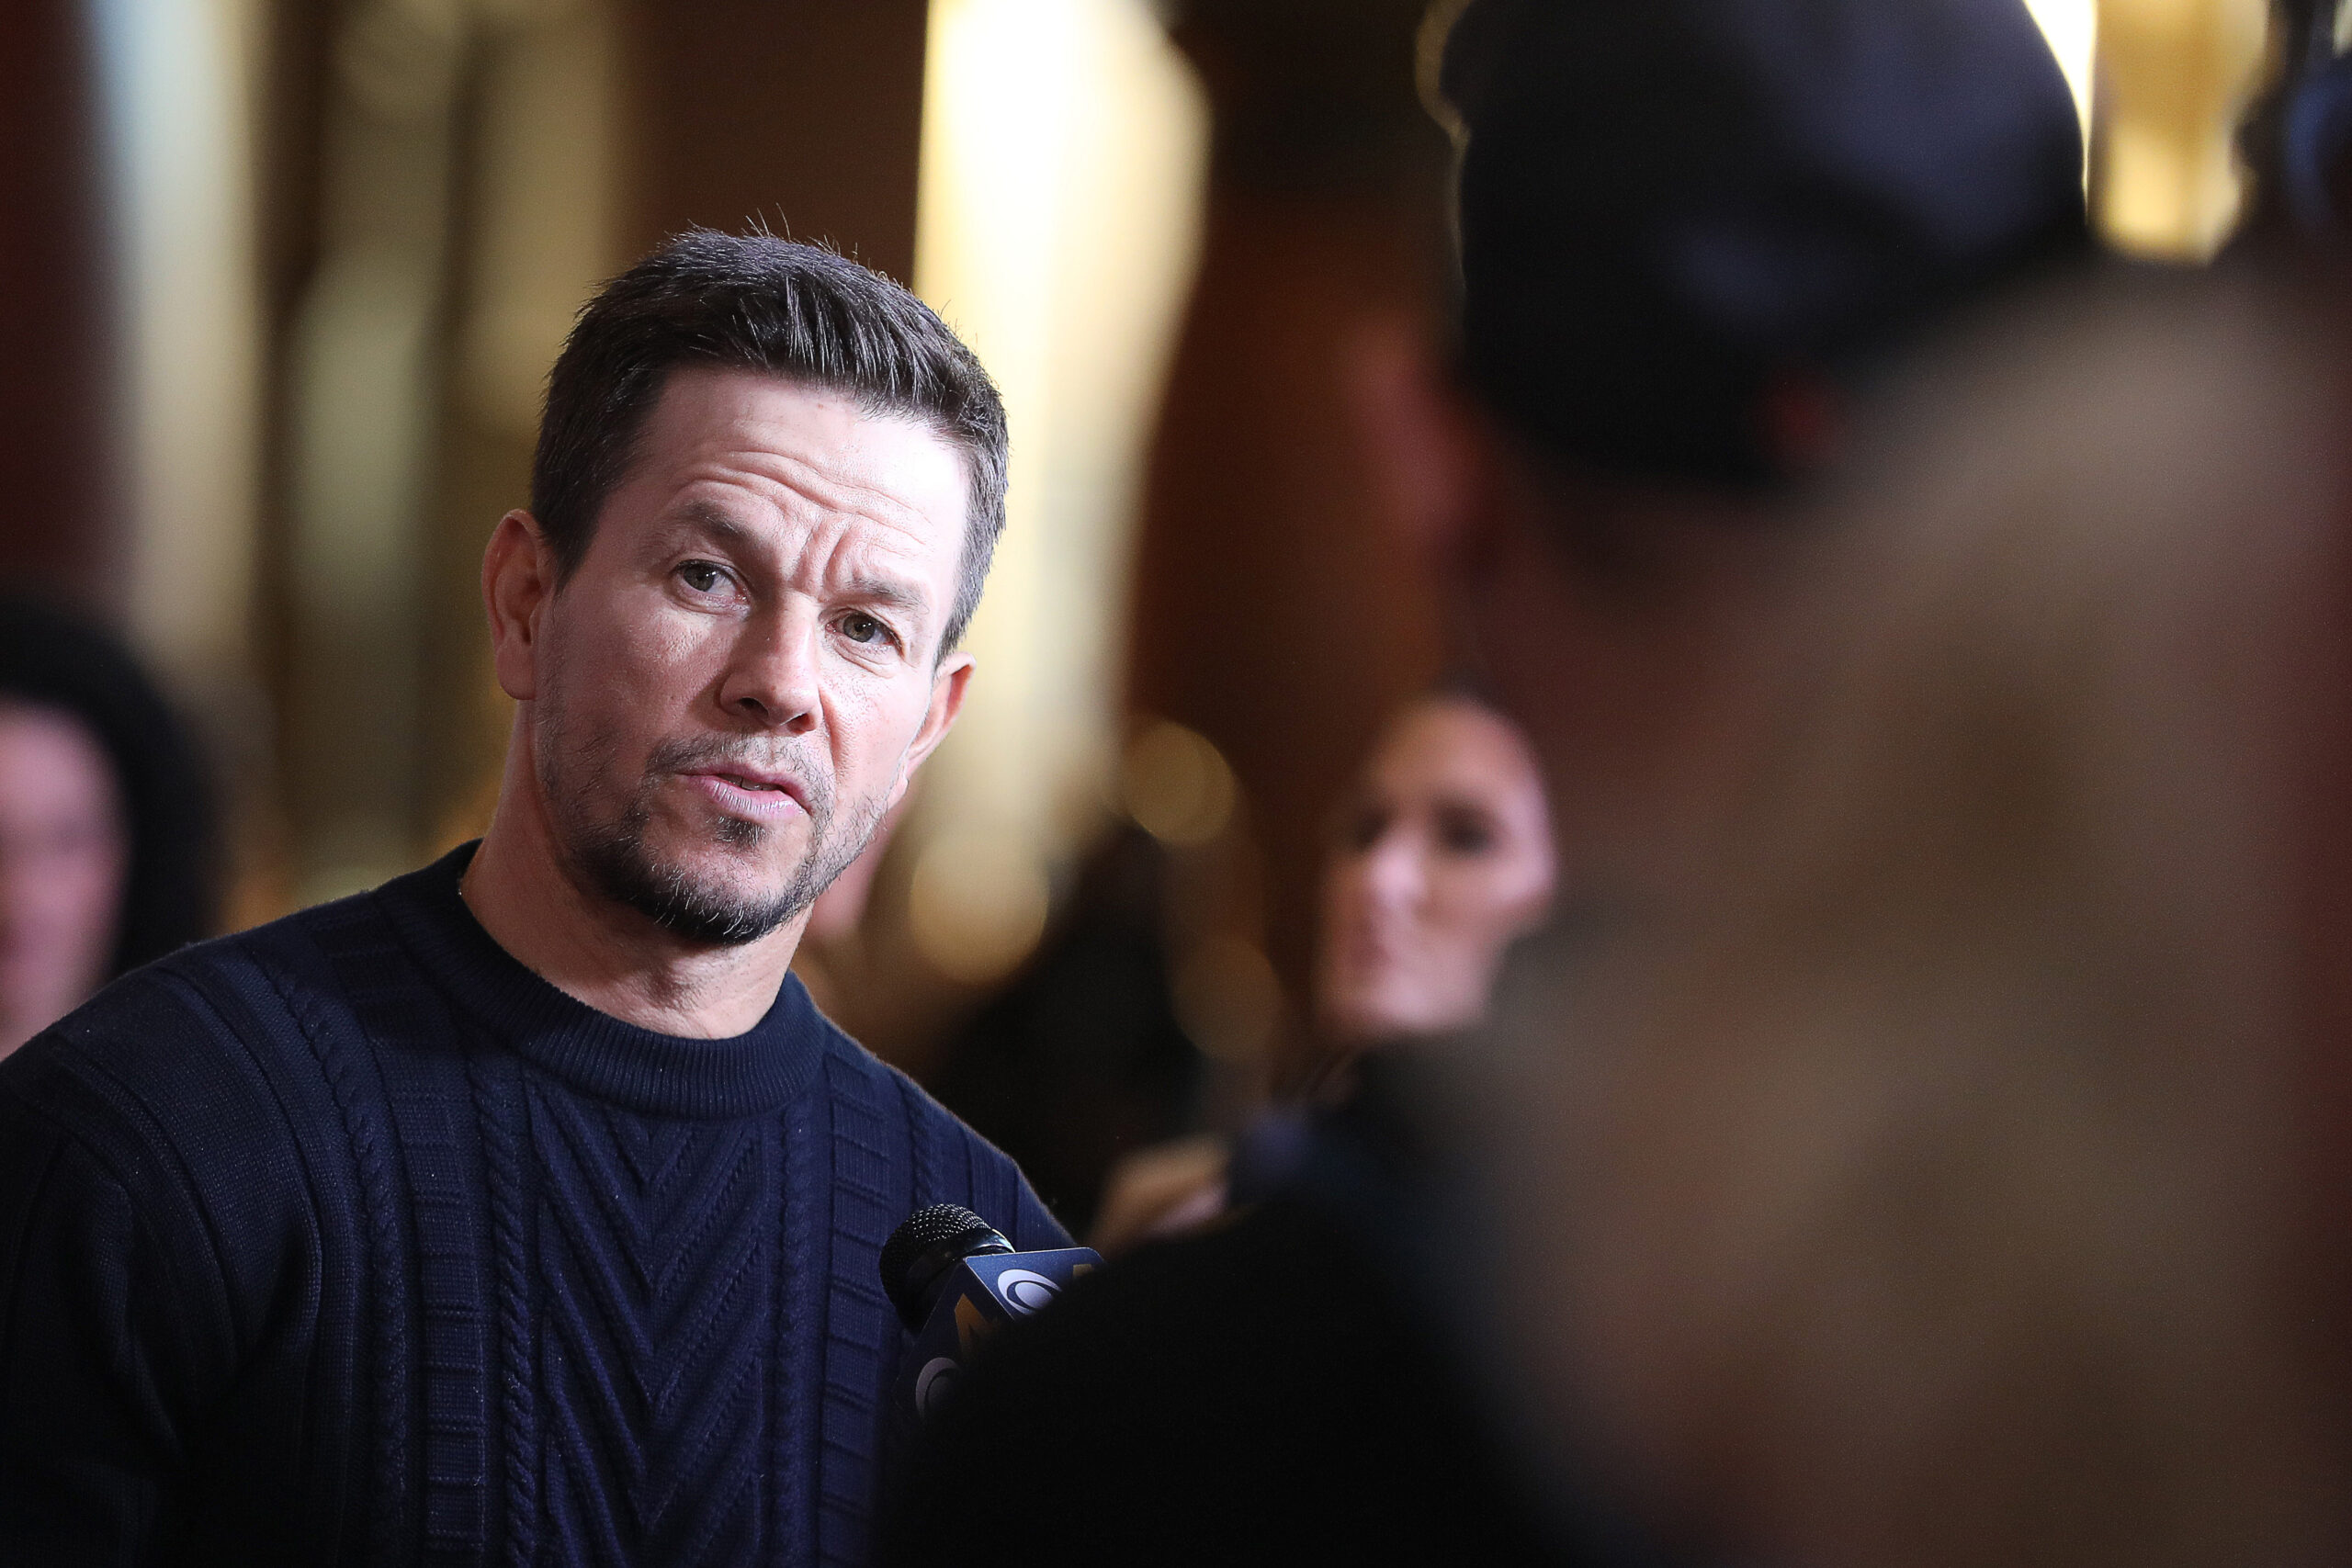 Mark Wahlberg credits his success to his faith in God.